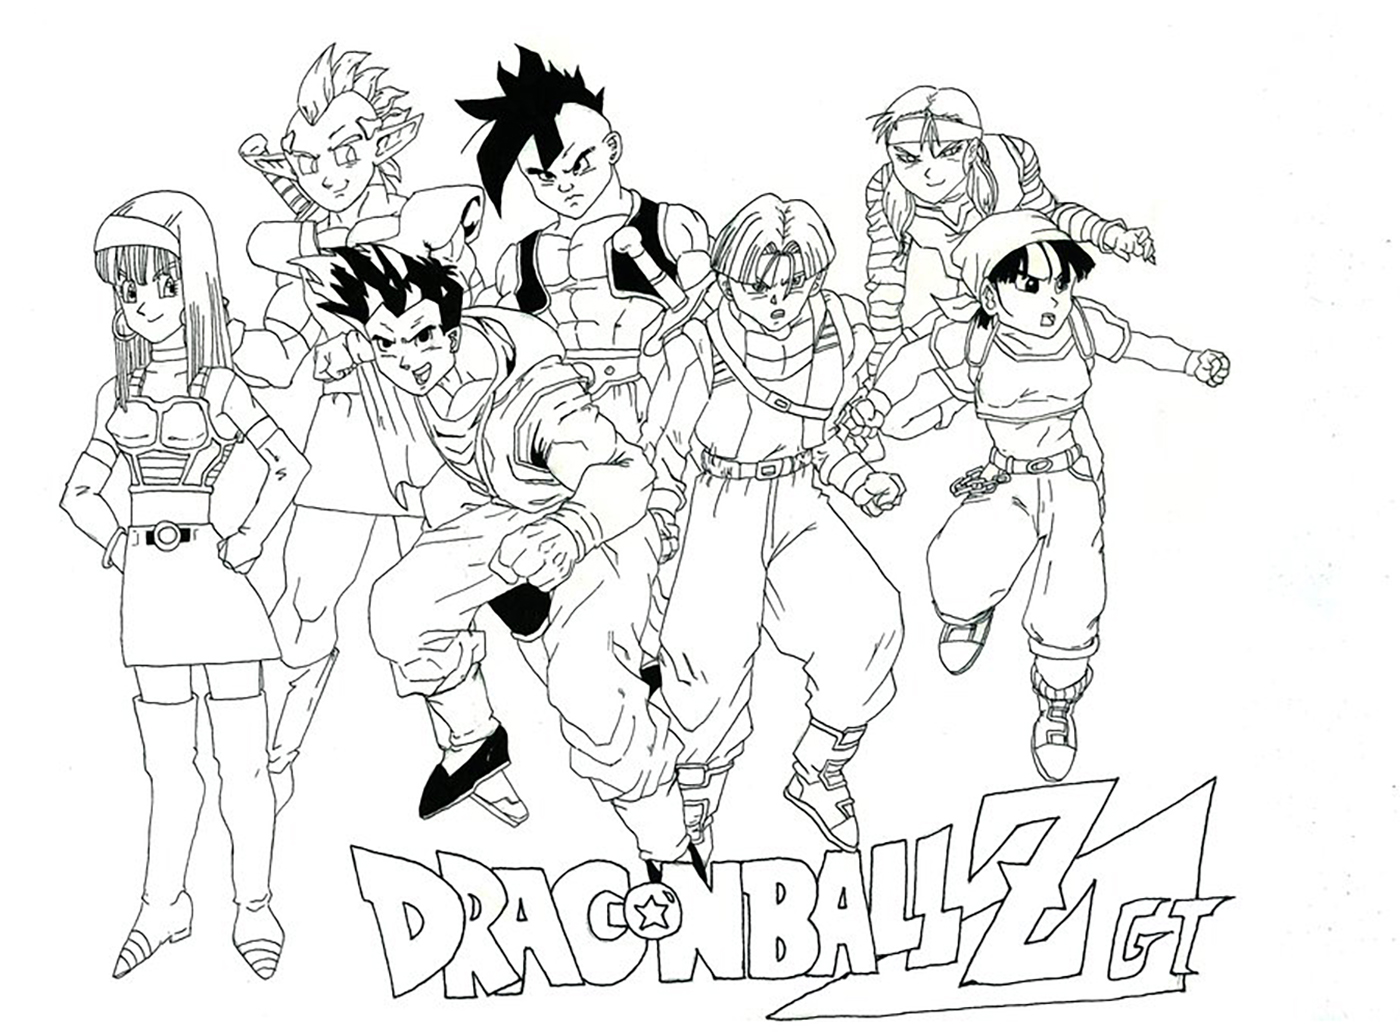 Incredible Dragon Ball Z coloring page to print and color for free : Oob , Bulma , Trunks , Yamcha , Videl and Warriors